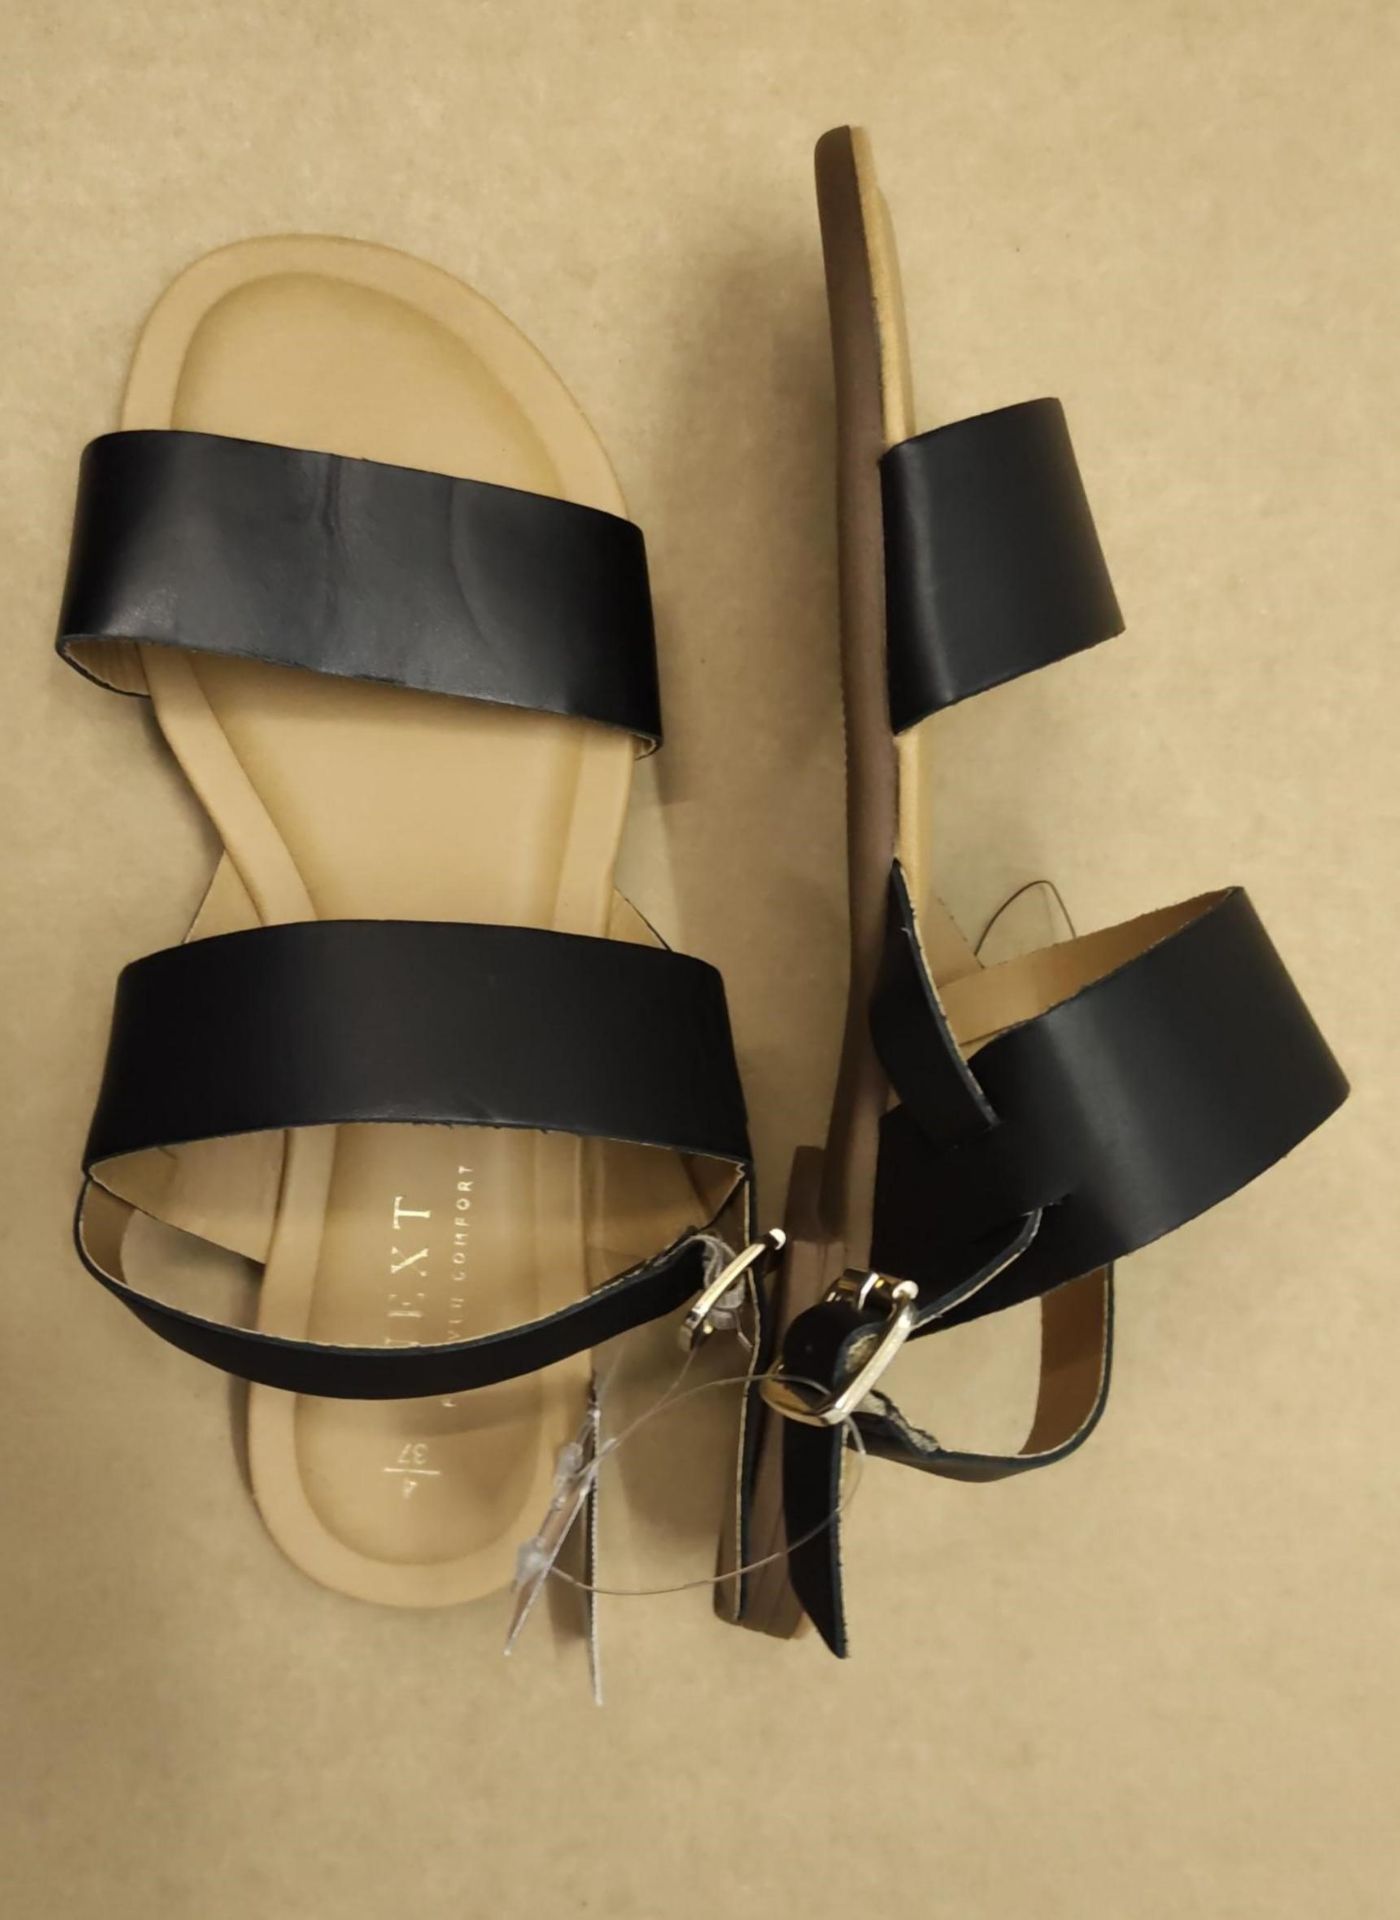 1 X UNBOXED BLACK STRAPPED SANDALS SIZE 4 £22Condition ReportALL ITEMS ARE BRAND AND INCLUDE TAGS